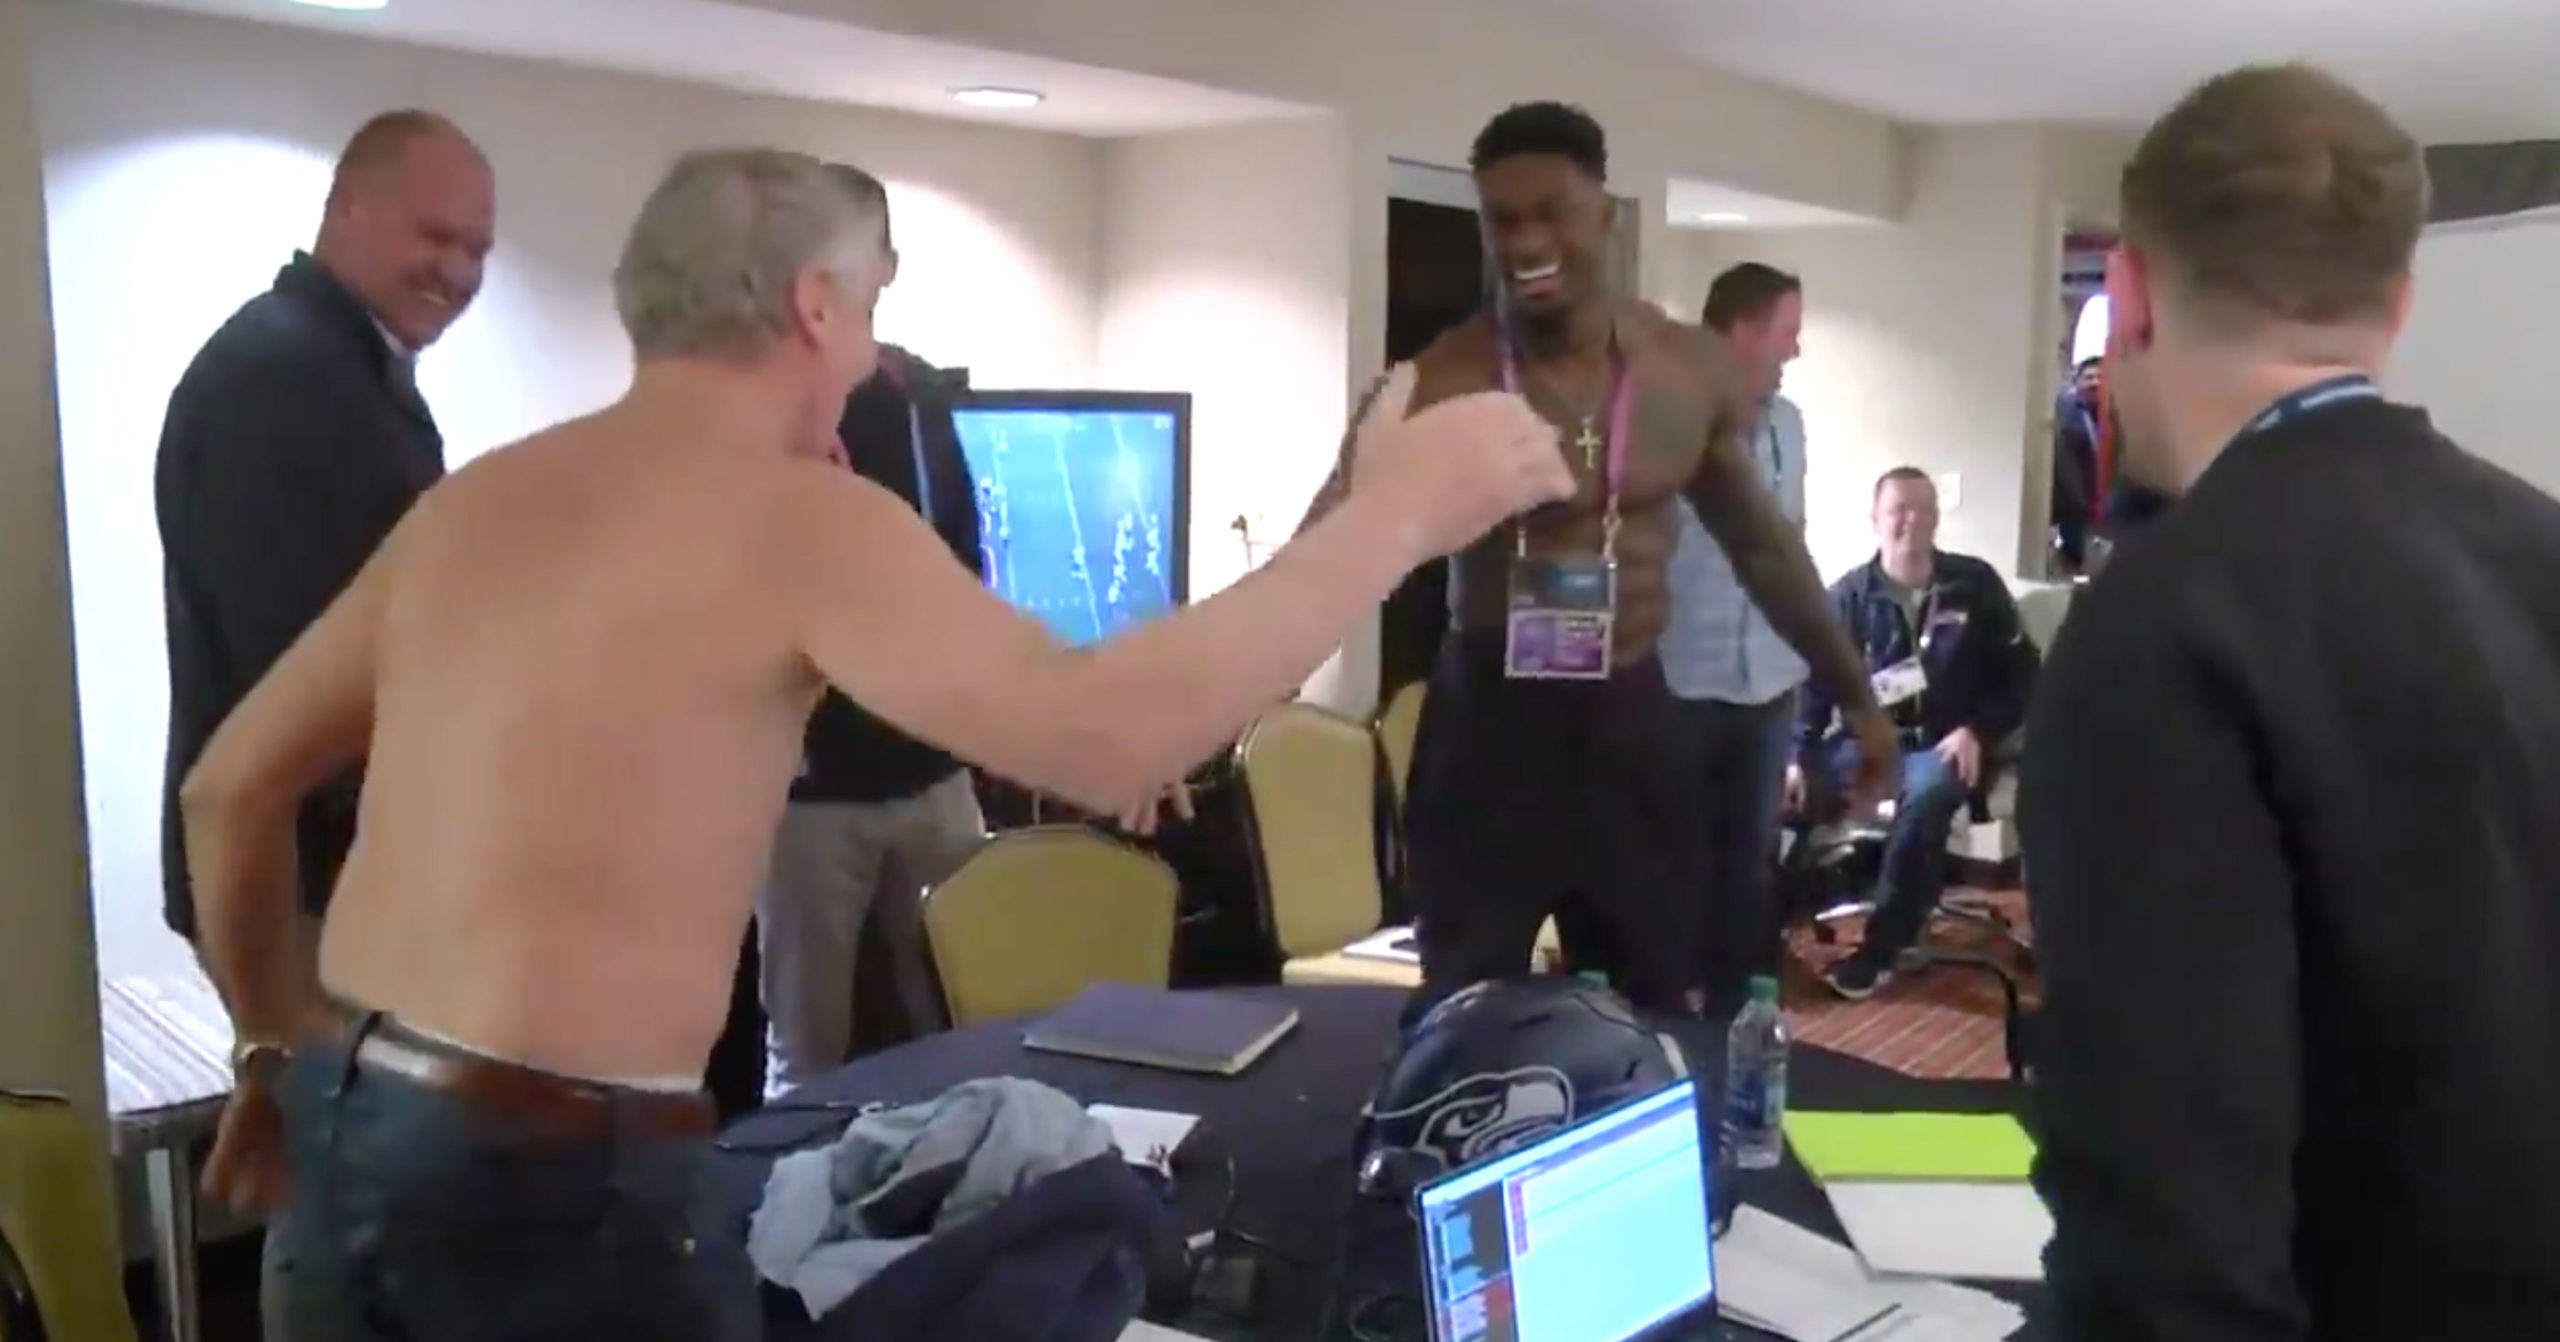 67-Year-Old Seahawks Coach Pete Carroll Rips His Shirt Off To Meet .  Metcalf (VIDEO)